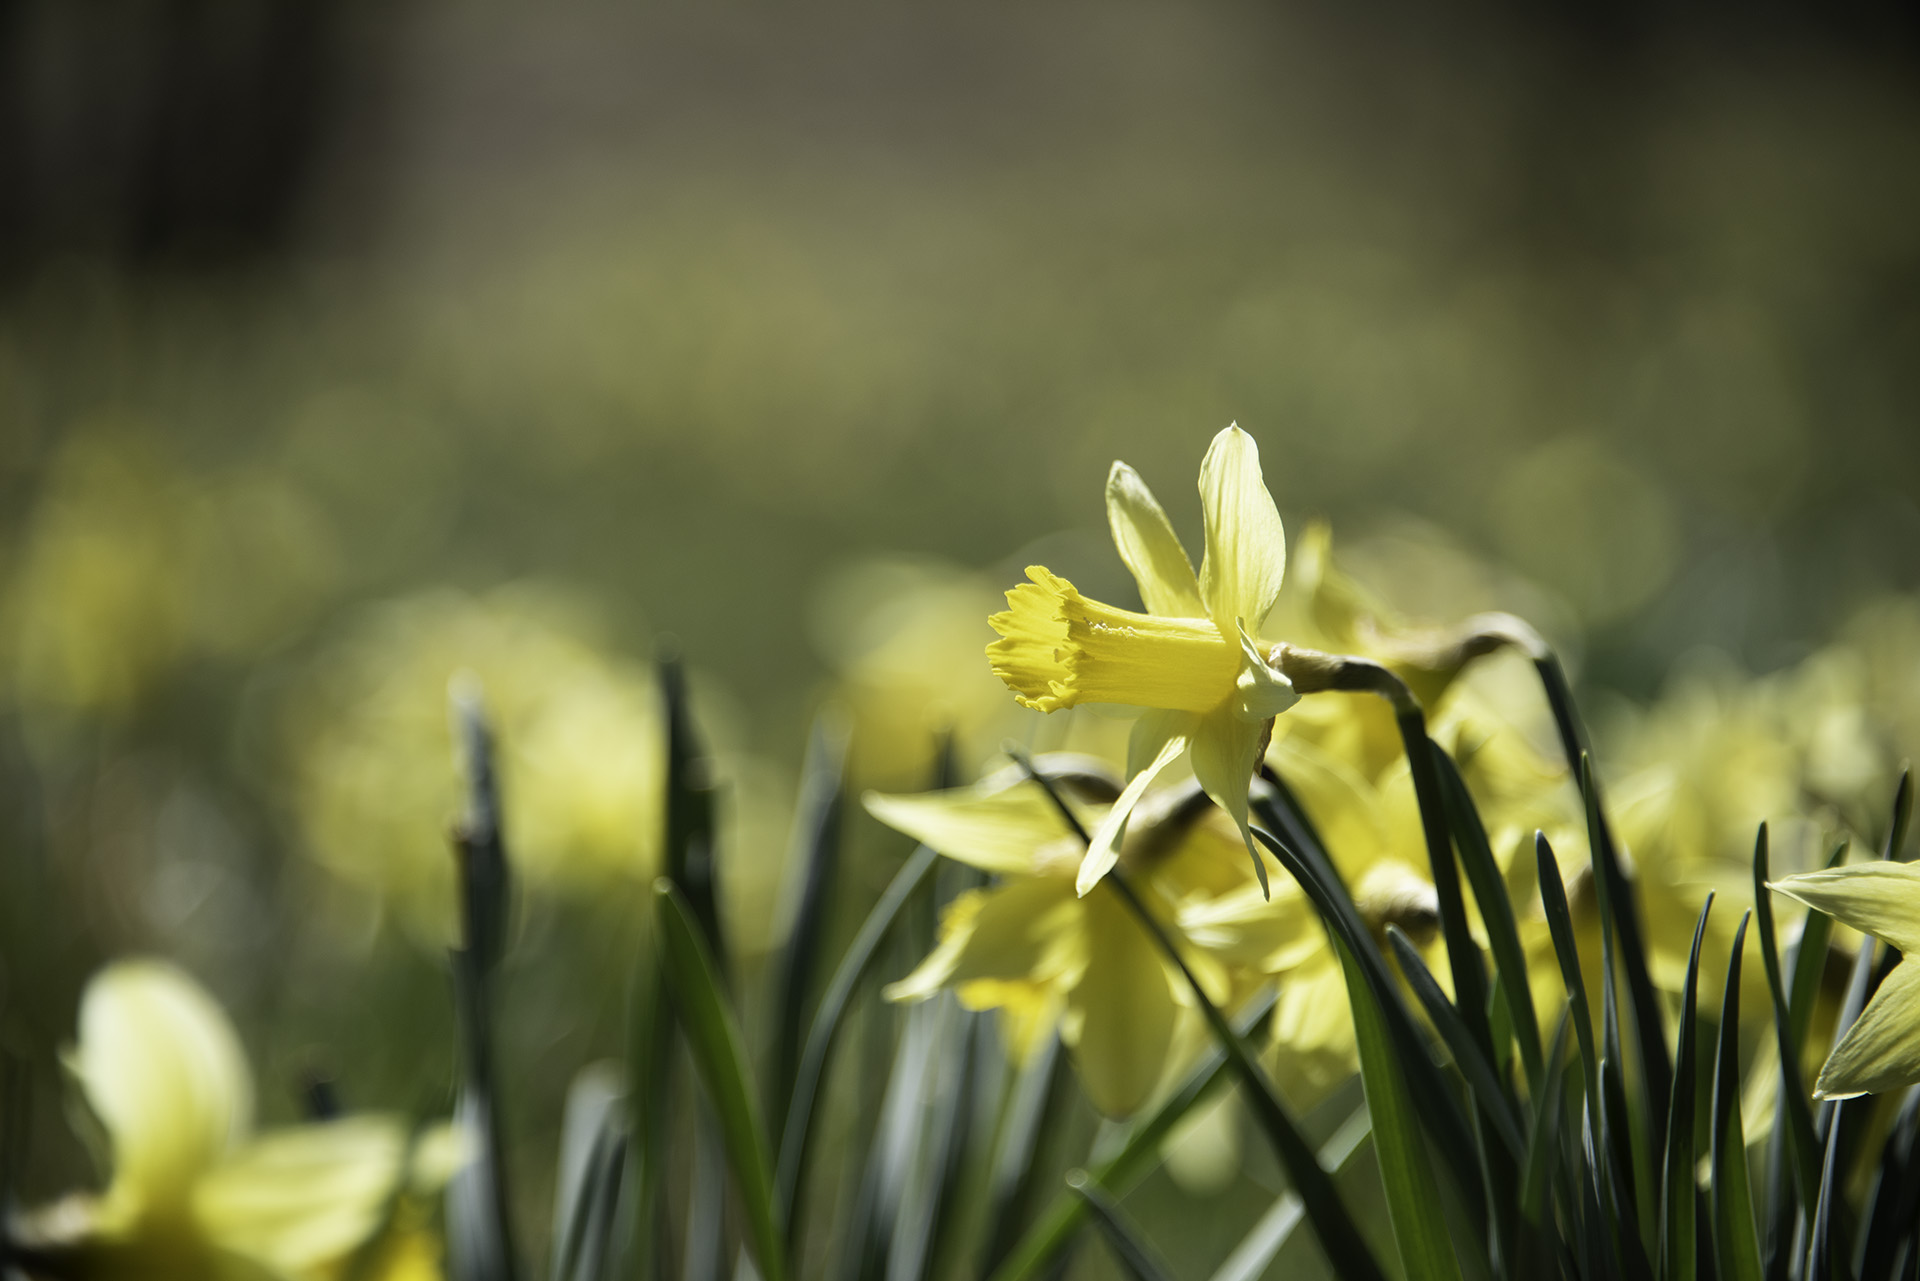 Tips and inspiration for spring landscape photography - The Landscape ...